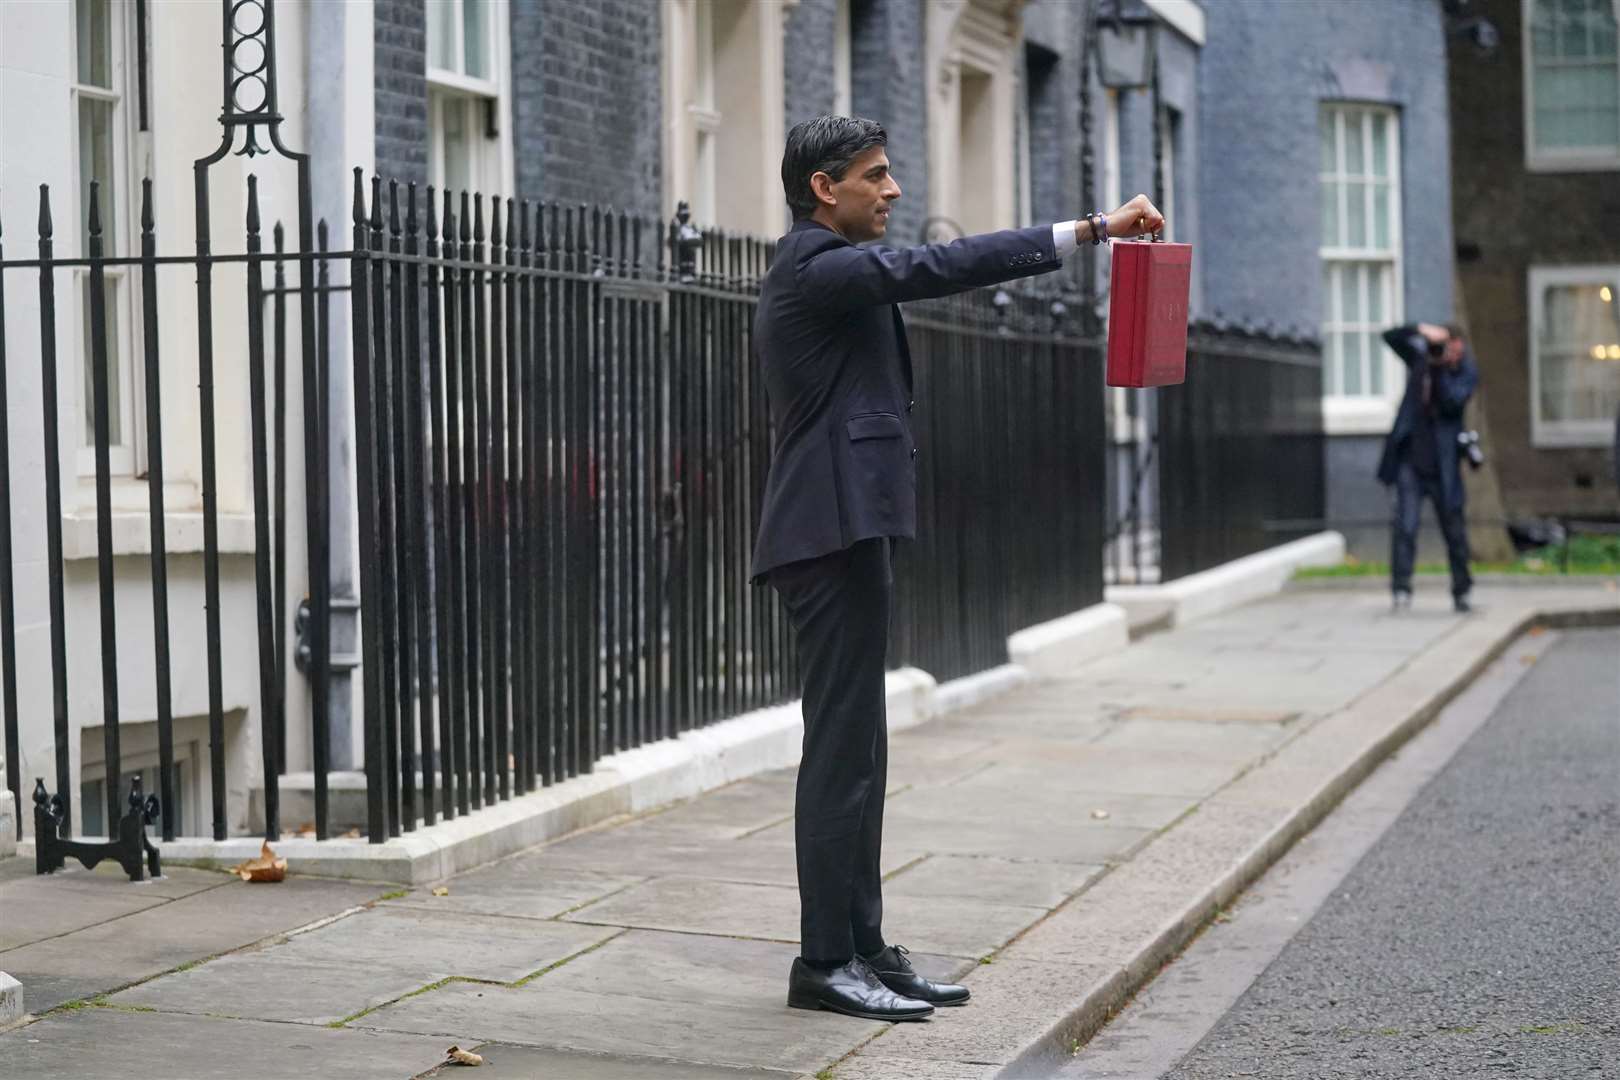 Rishi Sunak holds his ministerial red box outside 11 Downing Street (Victoria Jones/PA)